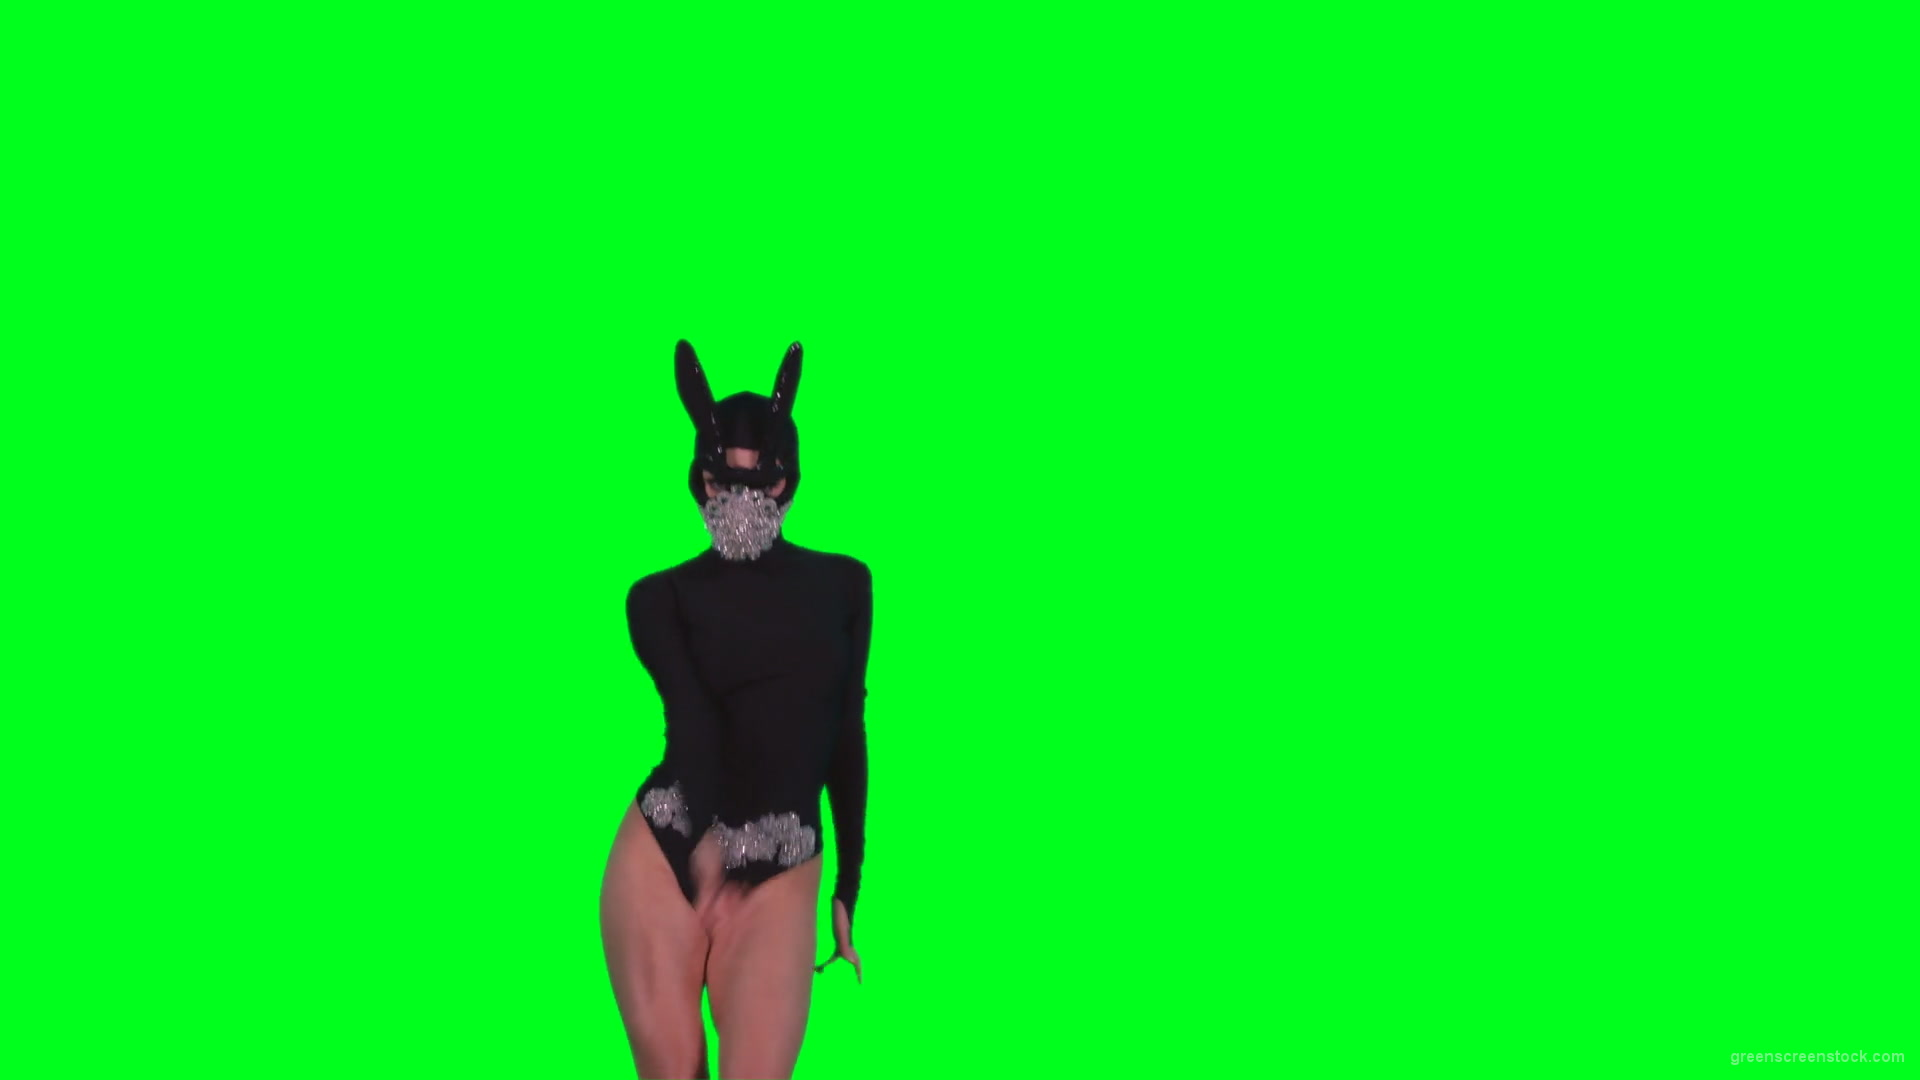 Sexy-bunny-girl-dance-performs-in-rabbit-costume-on-green-screen-4K-Video-Footage-1920_006 Green Screen Stock